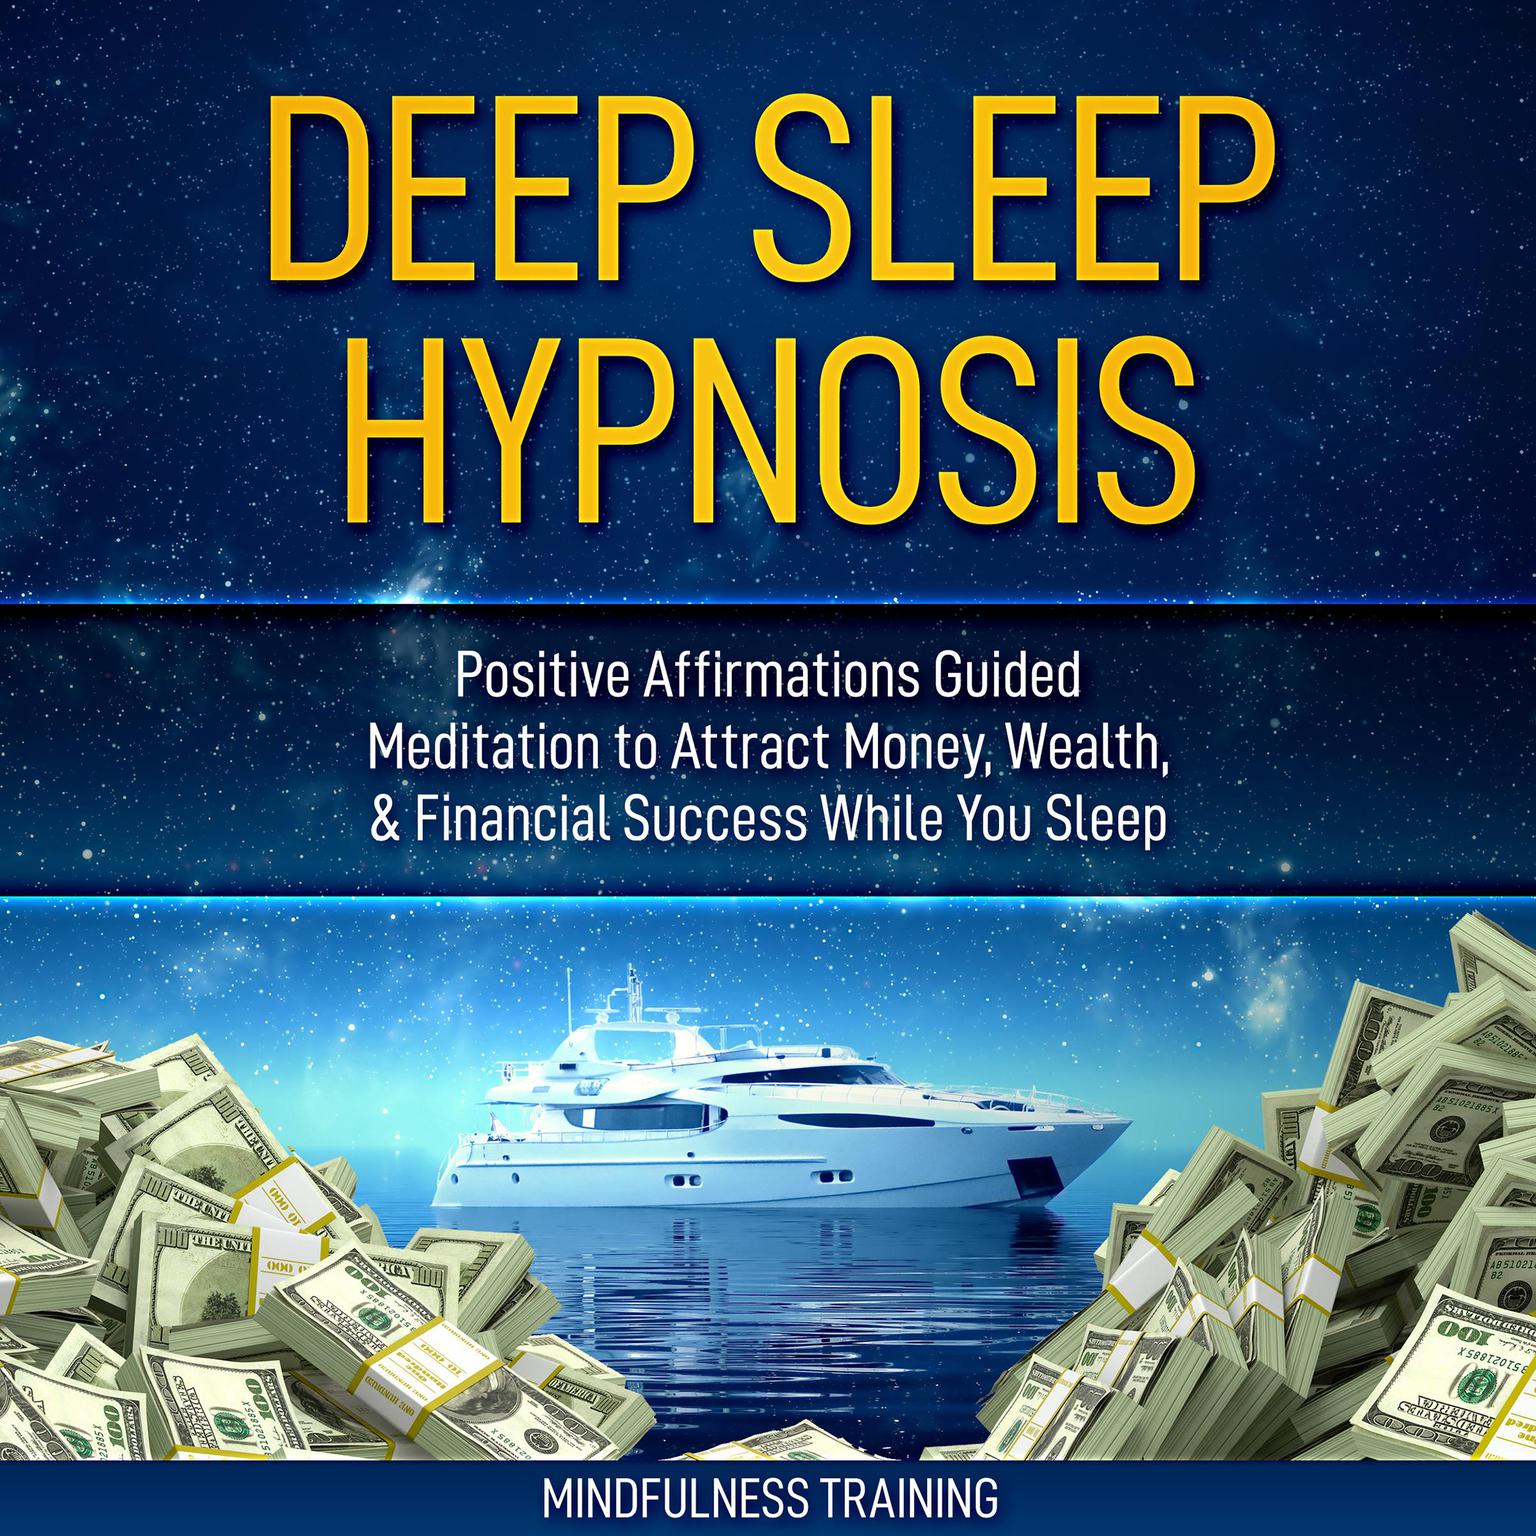 Deep Sleep Hypnosis: Positive Affirmations Guided Meditation to Attract Money, Wealth, & Financial Success While You Sleep (Self Hypnosis, Affirmations, Guided Imagery & Relaxation Techniques for Anxiety & Stress Relief) Audiobook, by Mindfulness Training